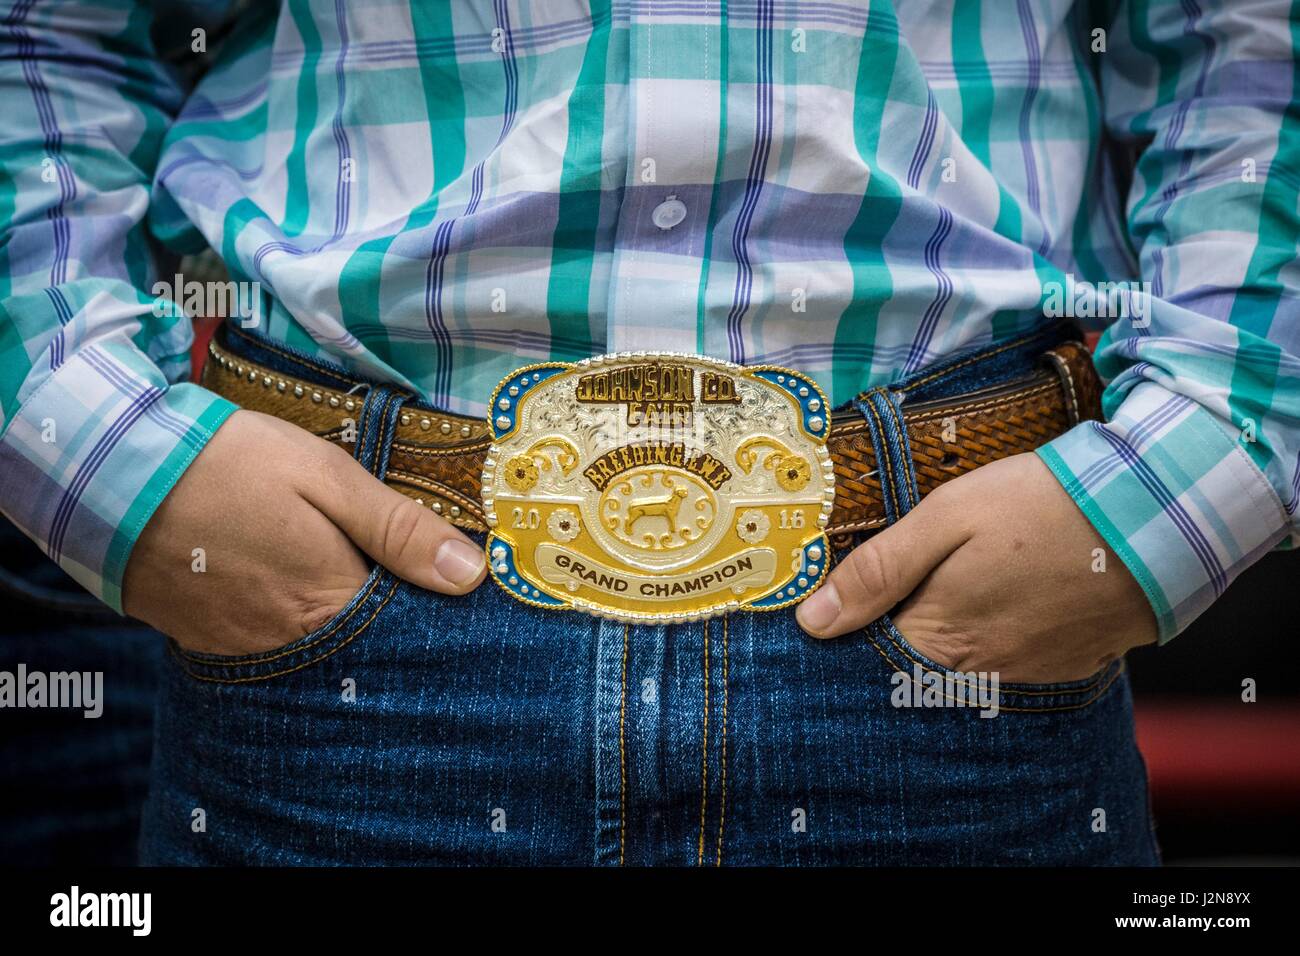 A young boy shows off prize Grand Champion buckle for sheep breeding during the American Royal annual livestock show and rodeo at the Kemper Arena April 28, 2017 in Kansas City, Missouri. Stock Photo